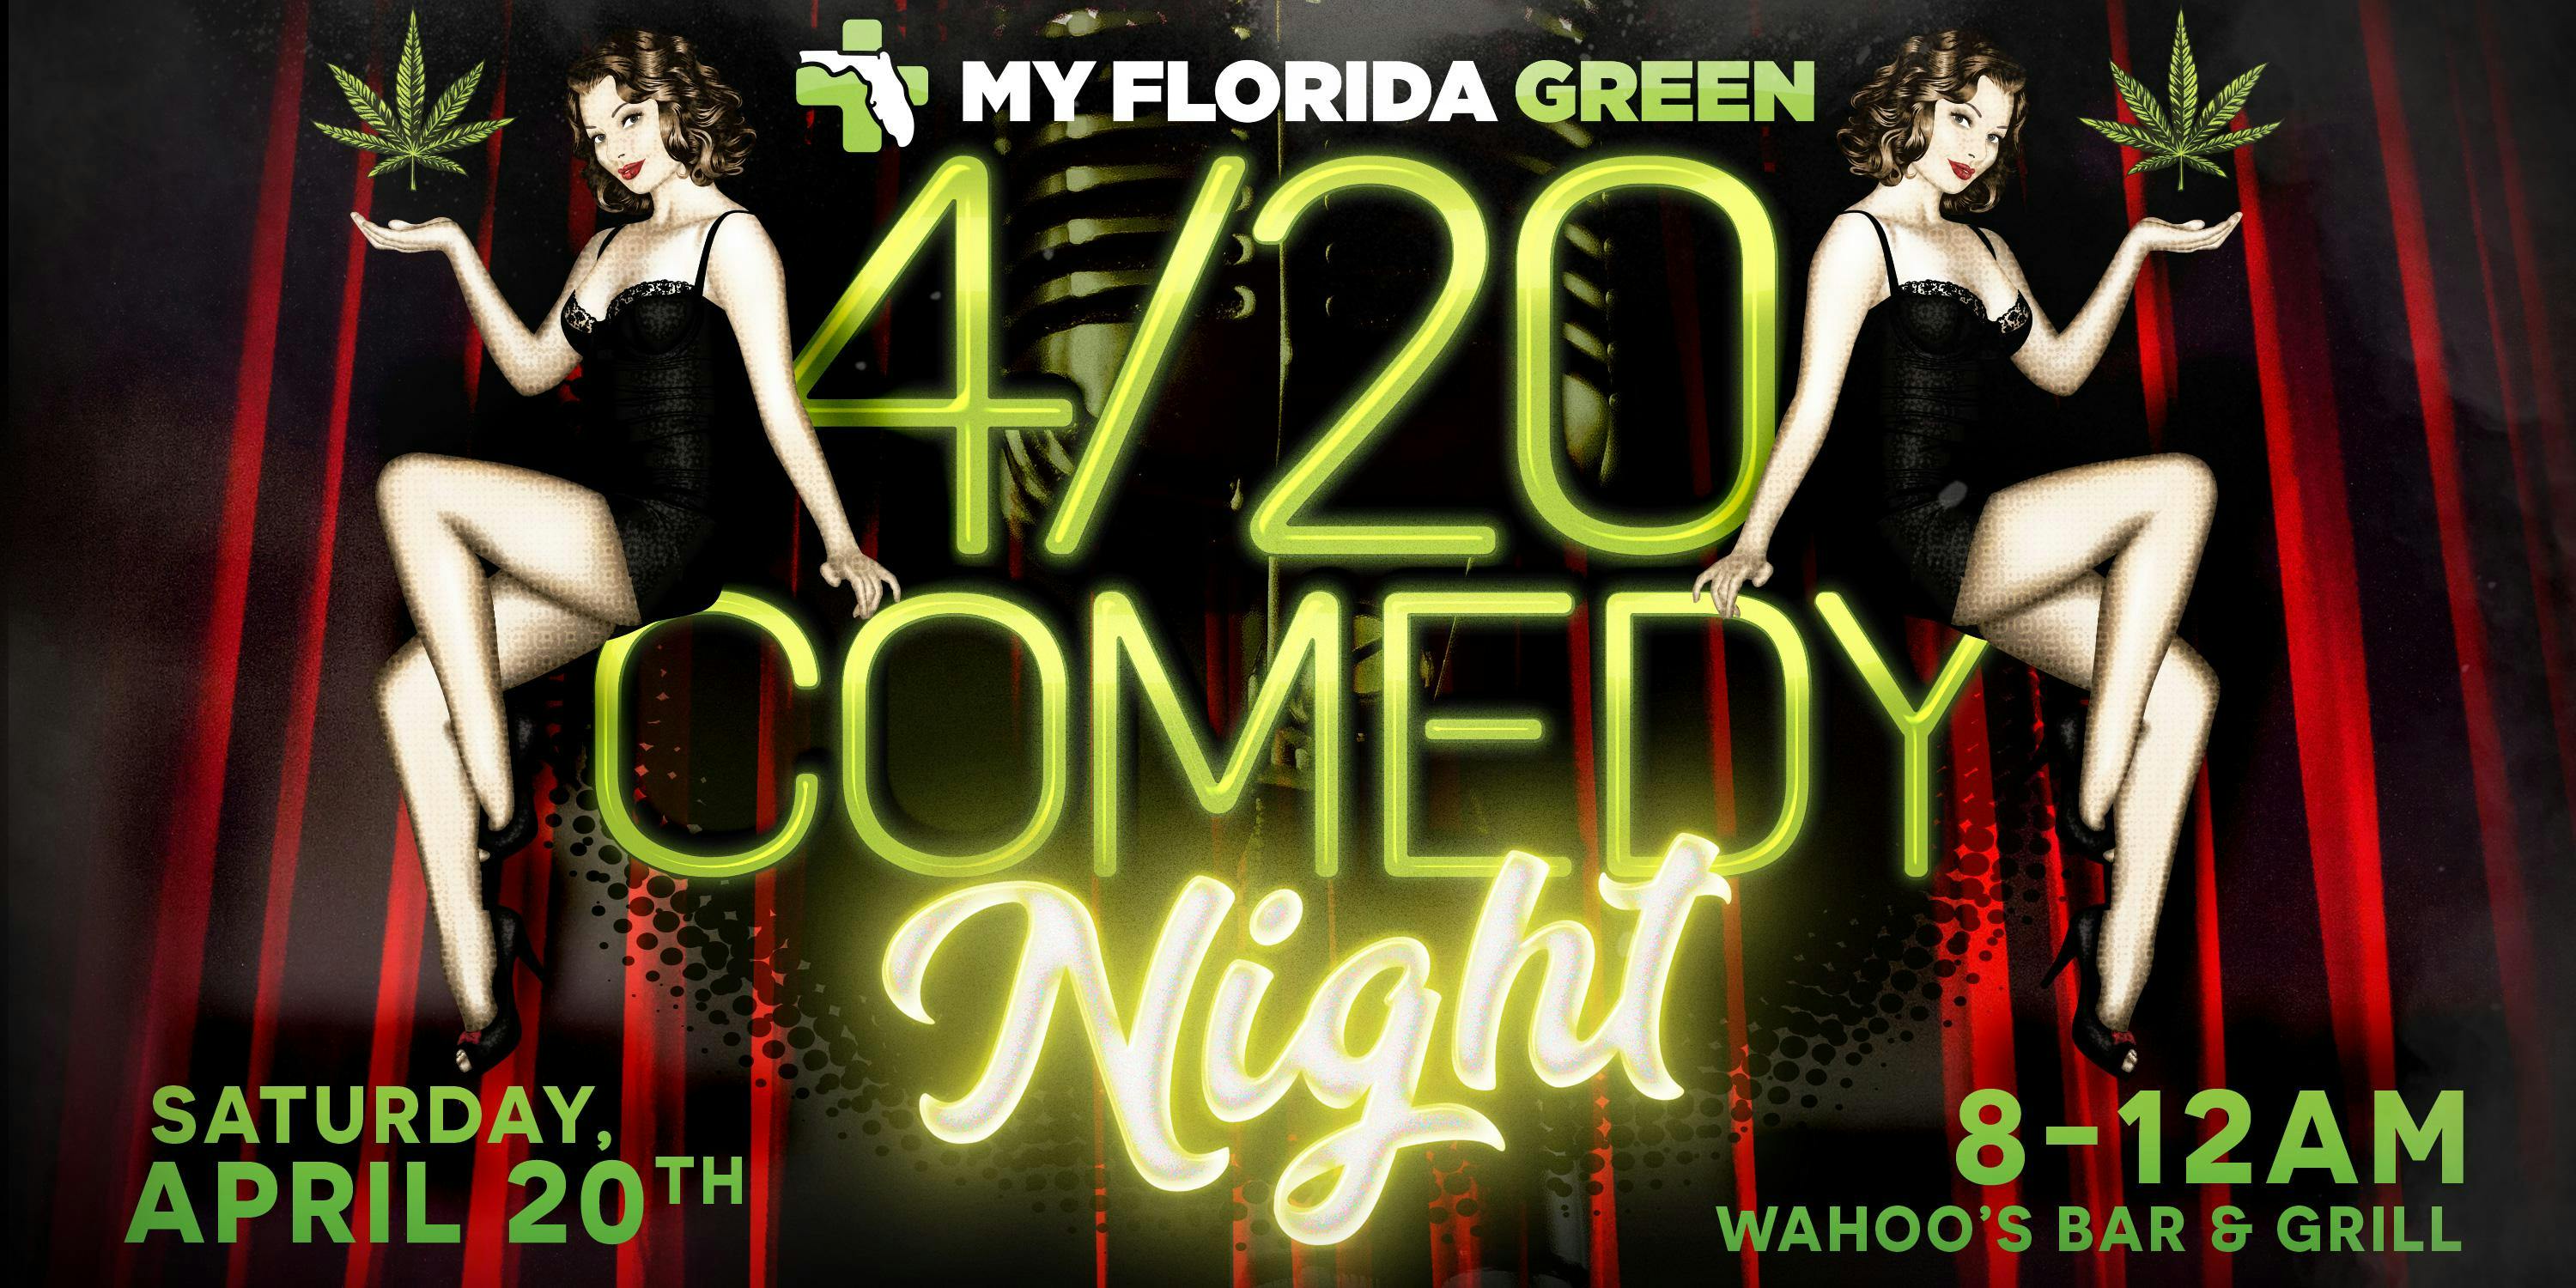 Comedy Night for My Florida Green patients and guests